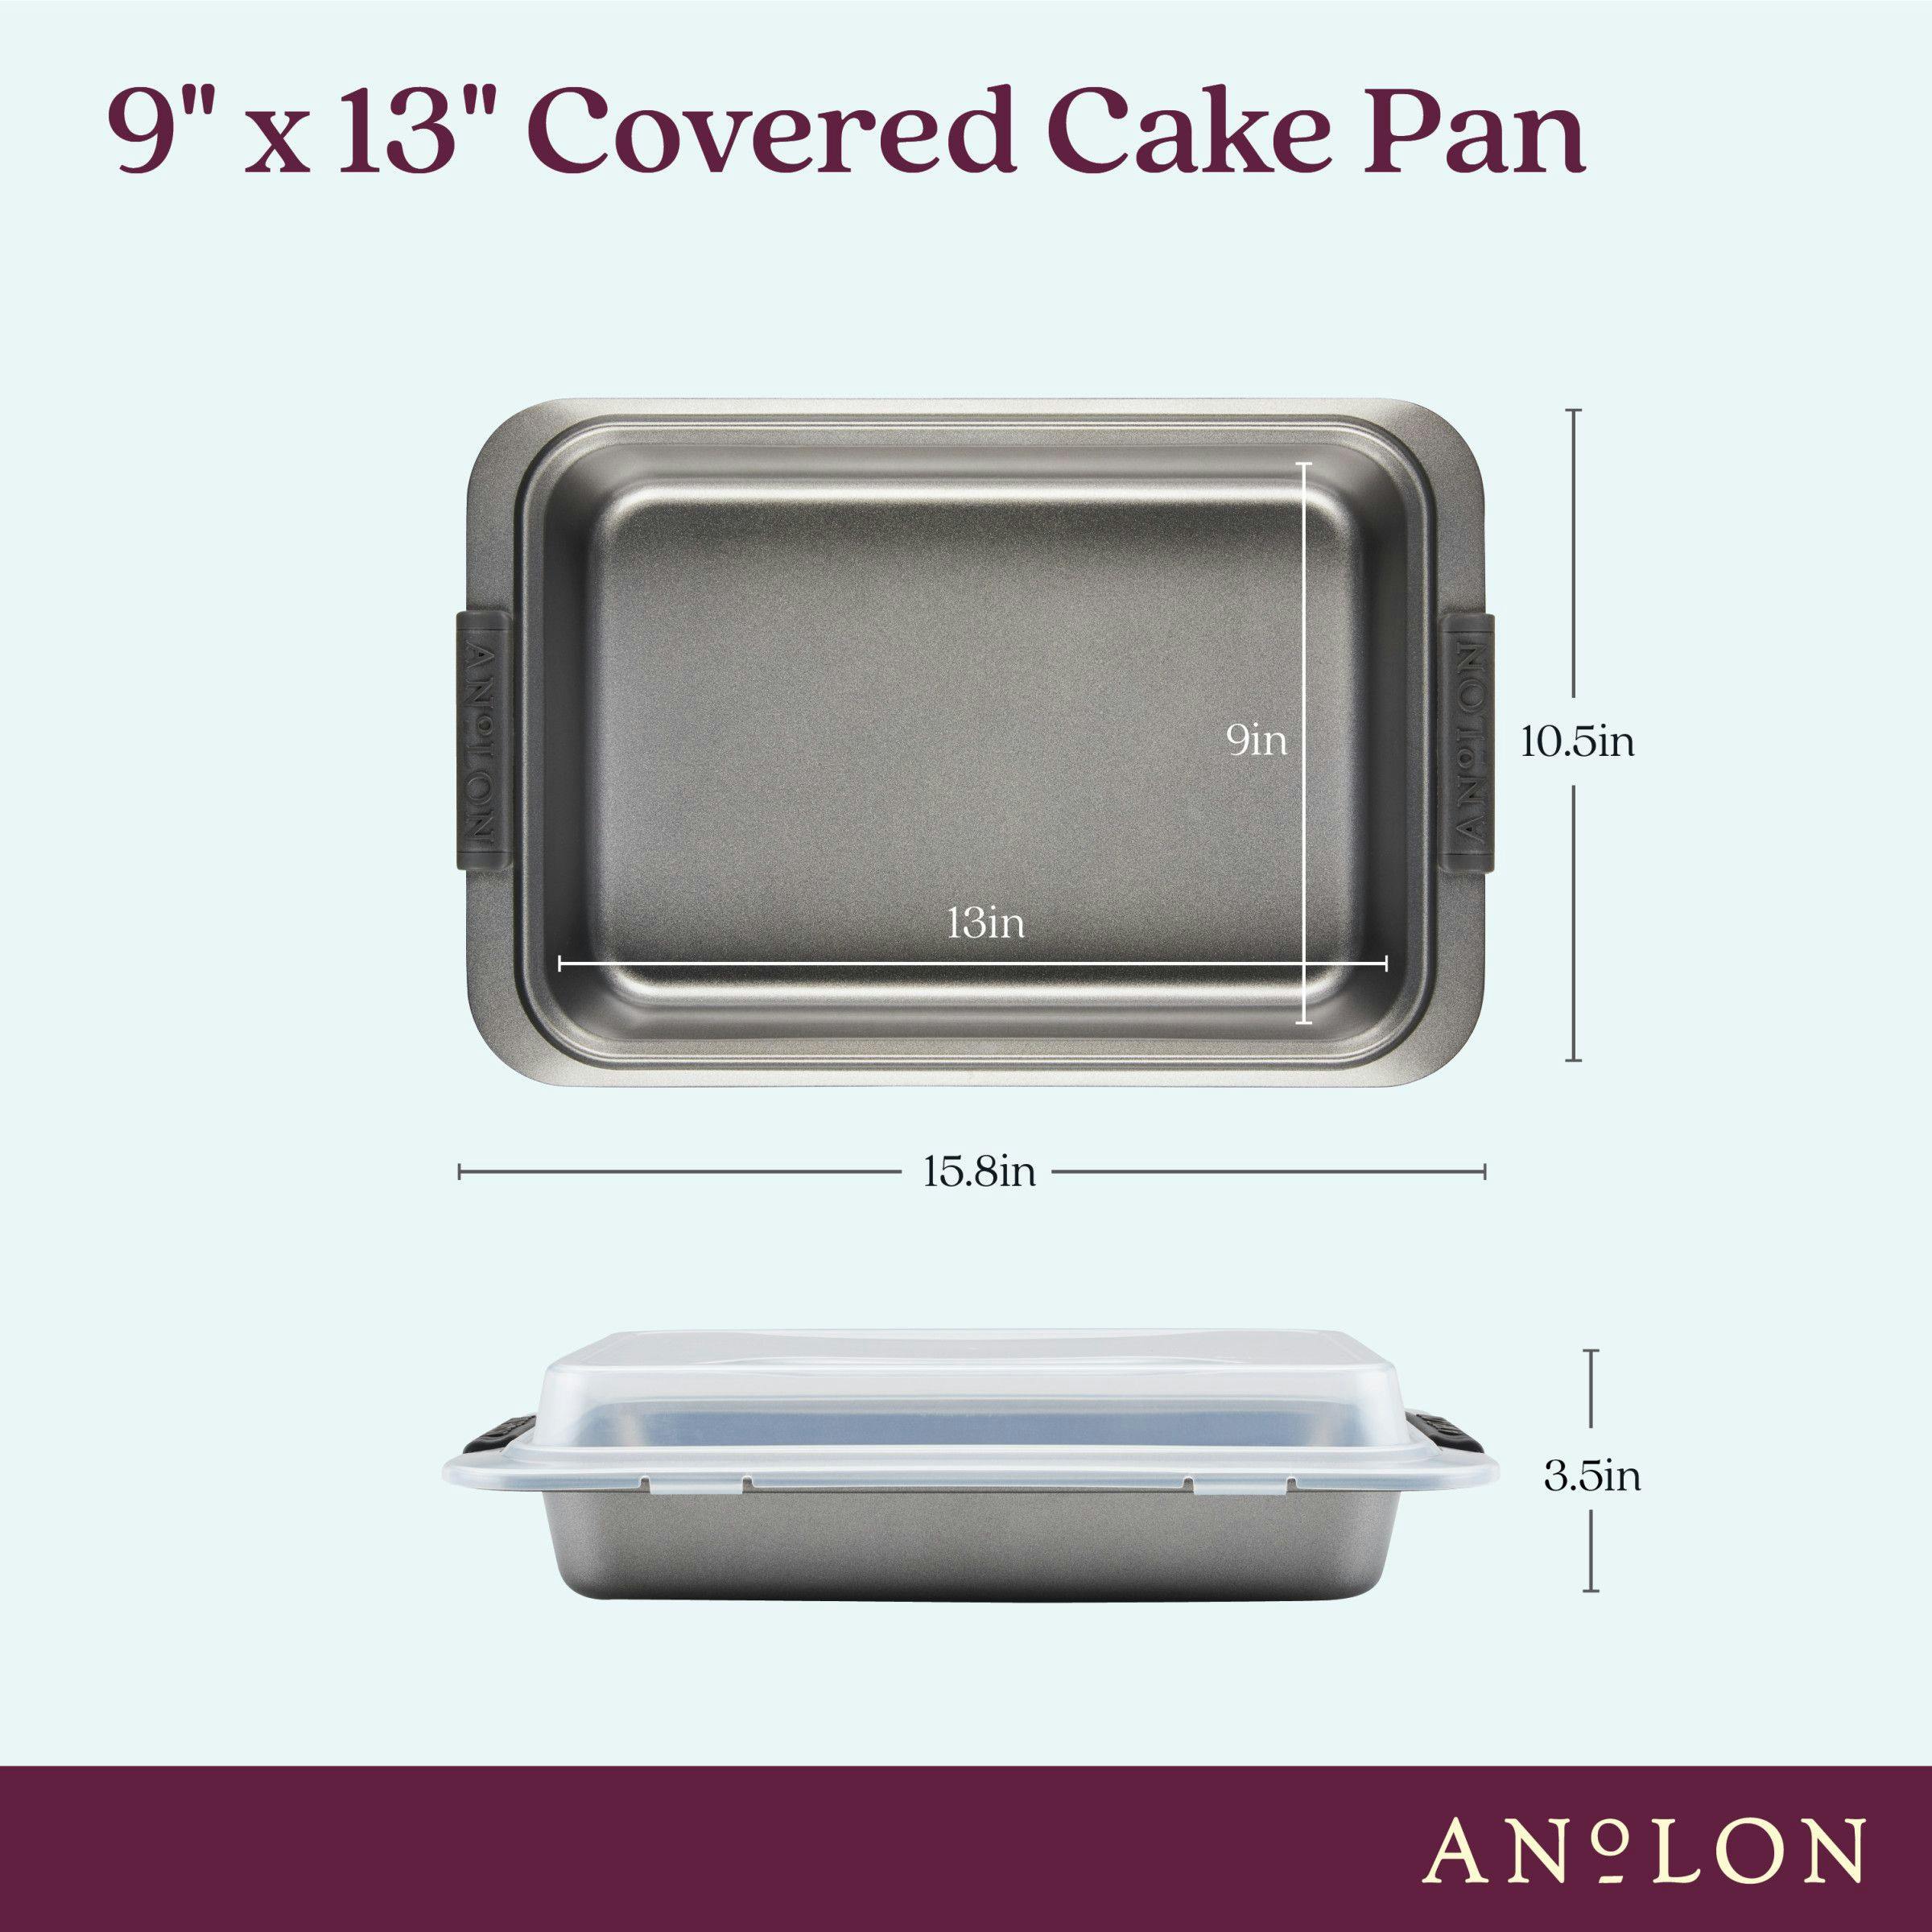 Anolon Advanced Bakeware Nonstick Cake Pan with Lid and Silicone Grips, 9- inch x 13-inch